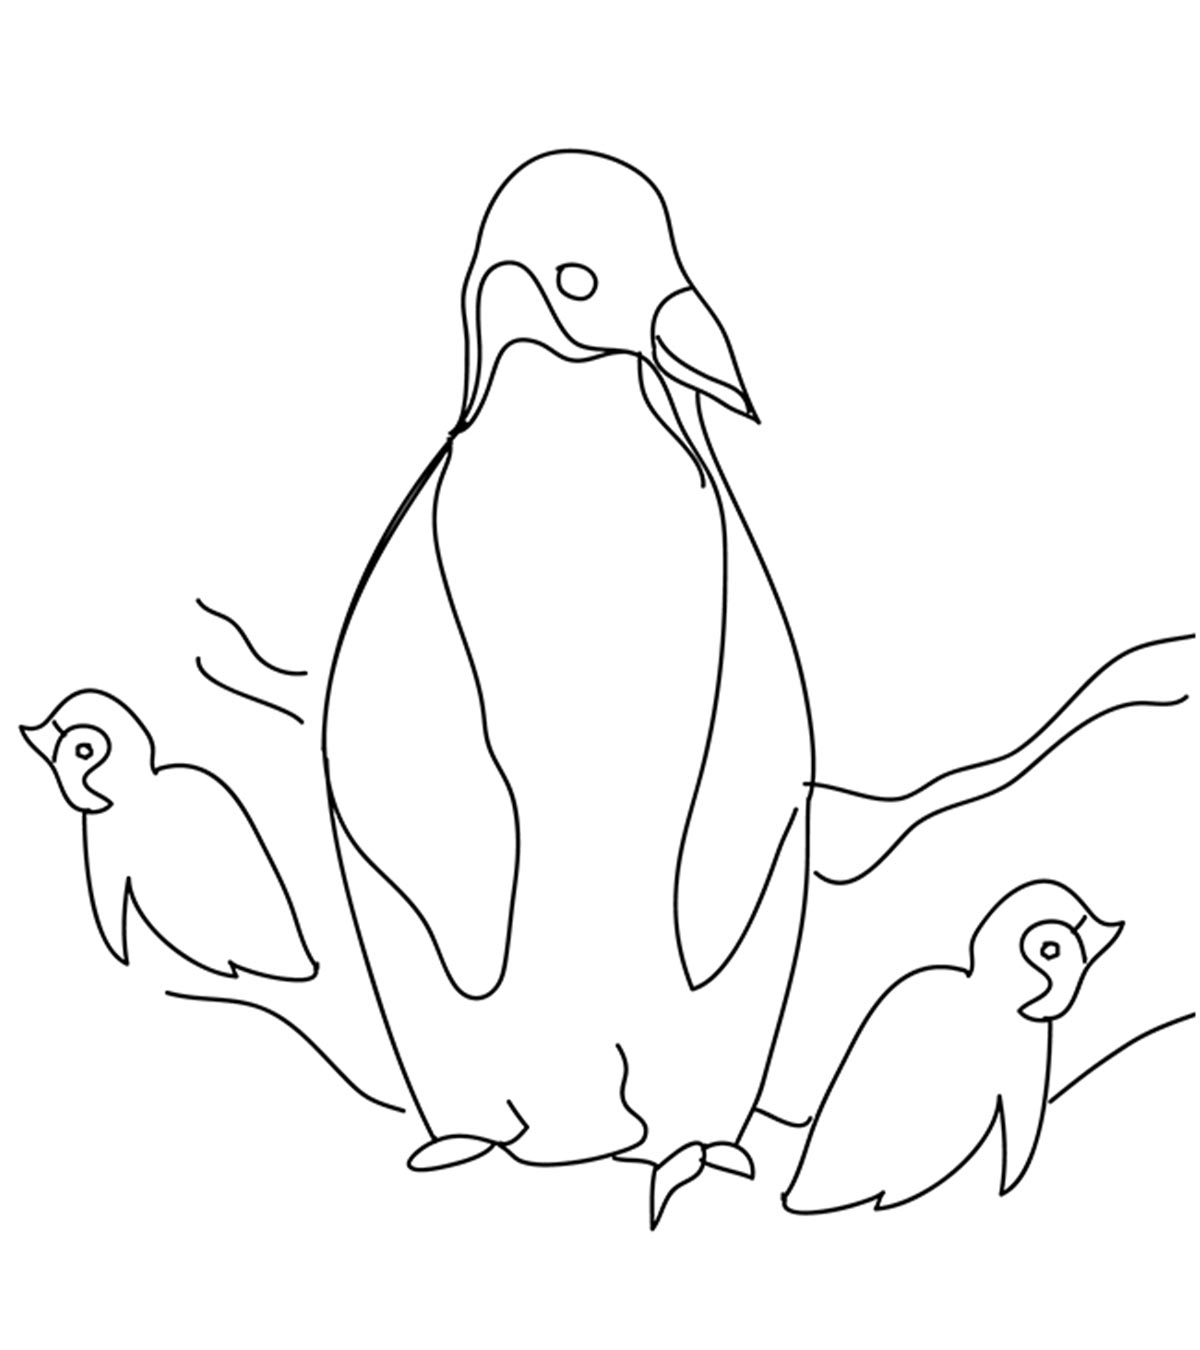 Kawaii Food Coloring Page Printable Pictures Of Penguins To Color